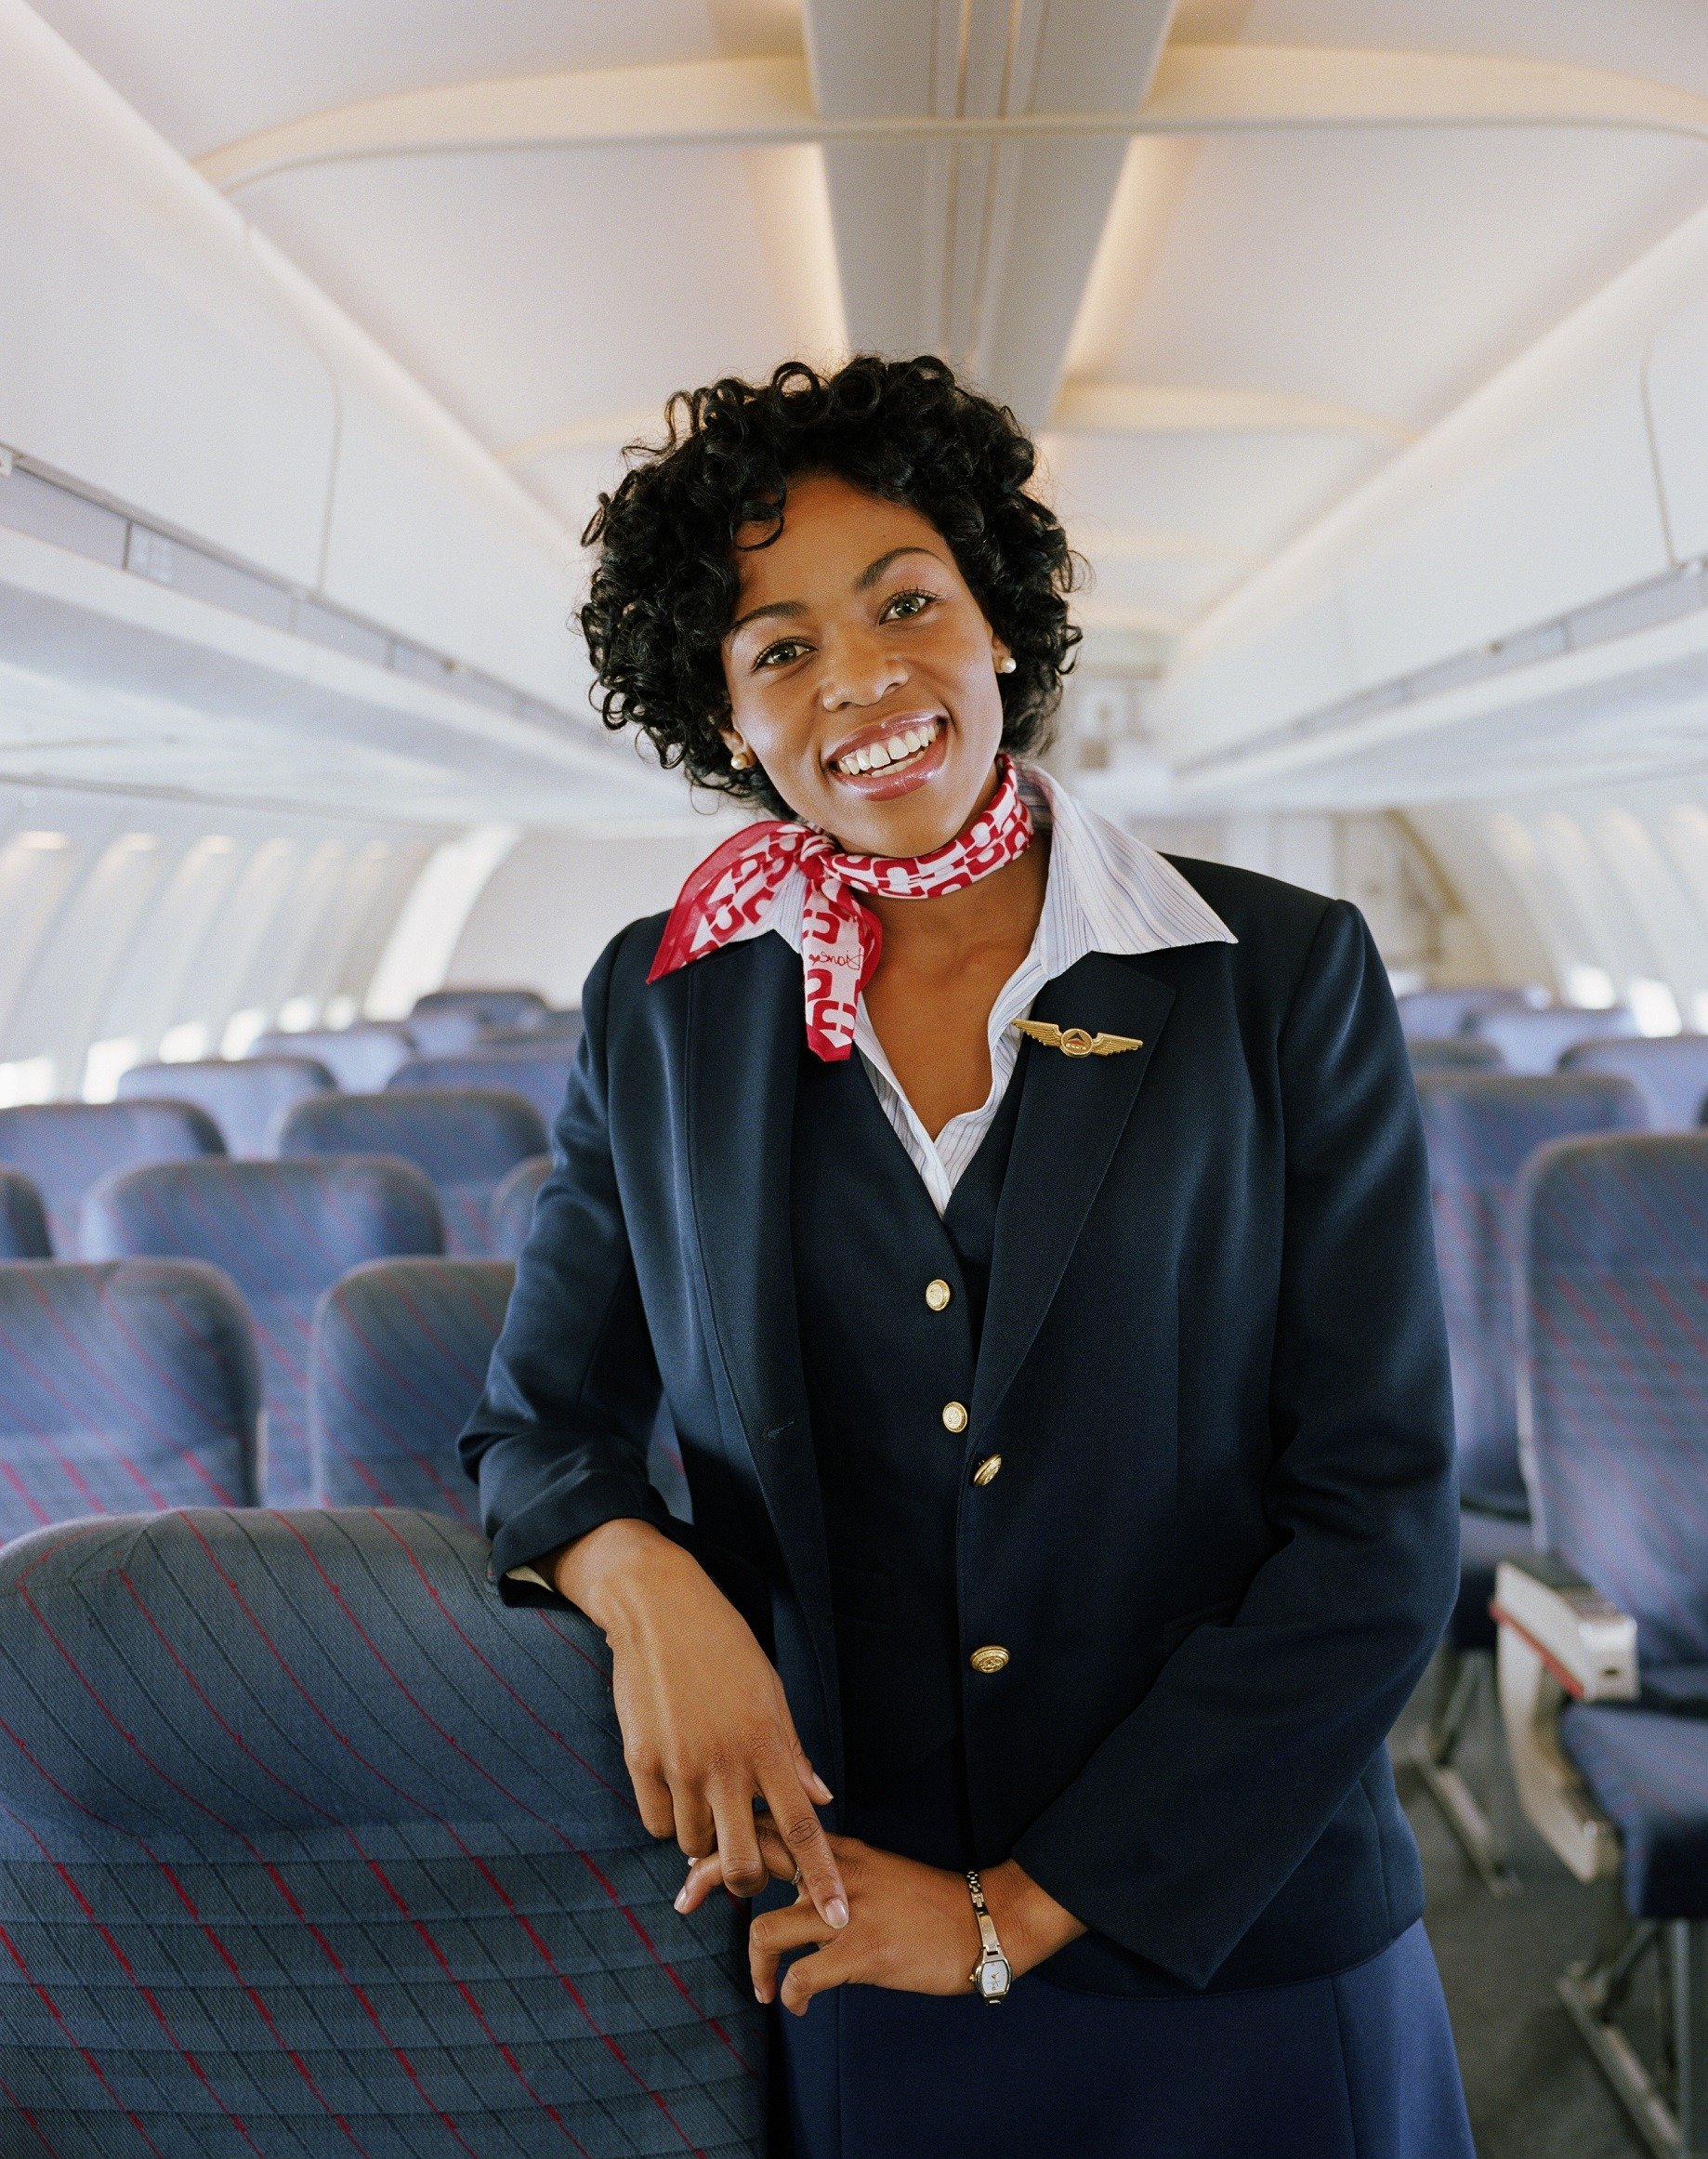 Want to Be a Flight Attendant? Here Are the 8 Things You Need to Know